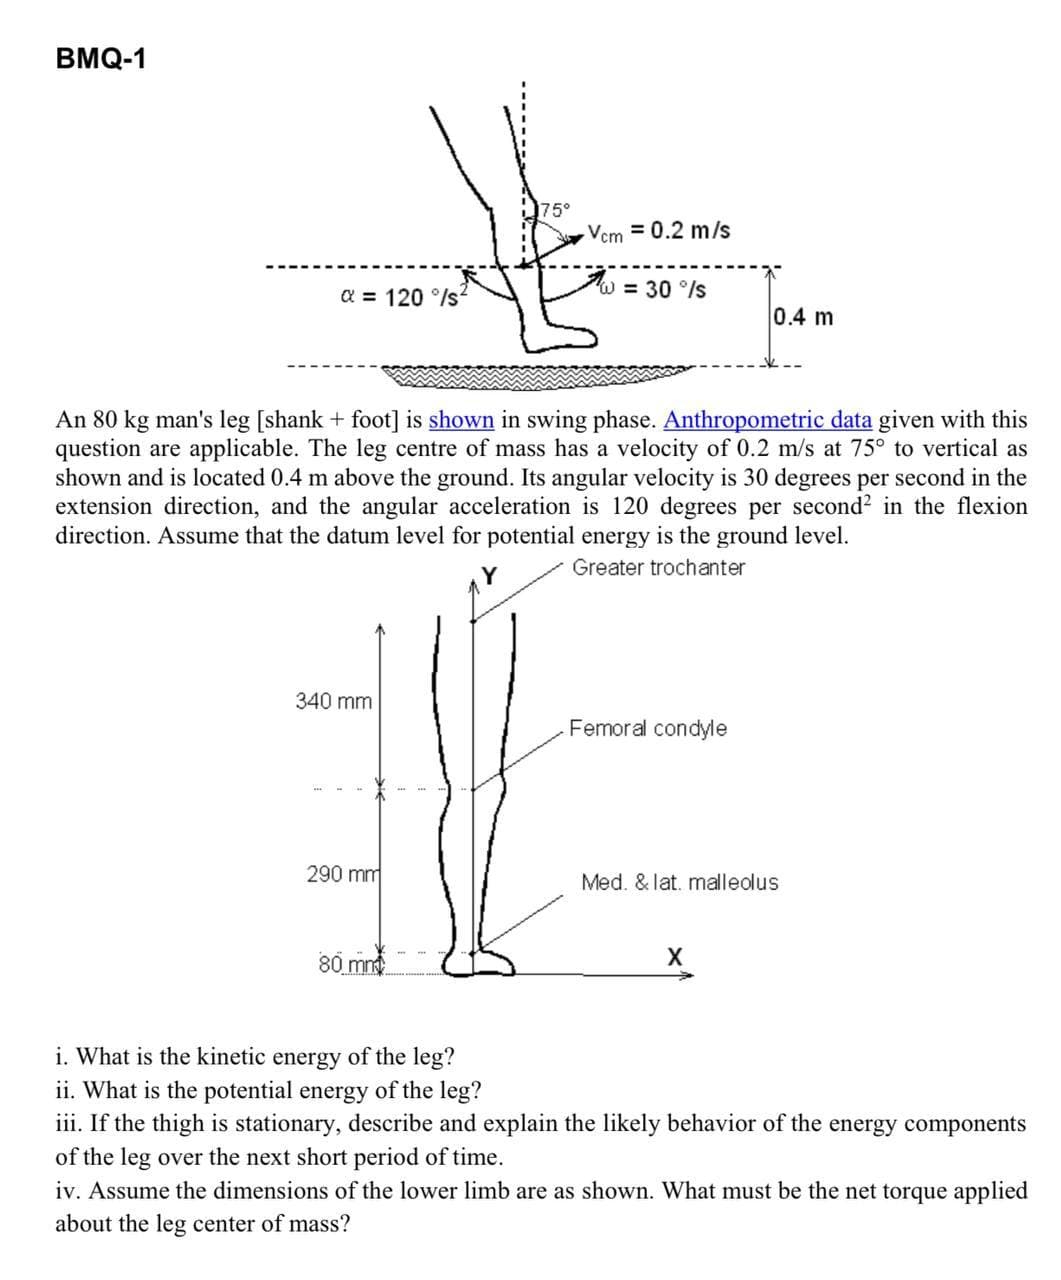 BMQ-1
a=120°/s
75°
Vem = 0.2 m/s
W = 30°/s
0.4 m
An 80 kg man's leg [shank + foot] is shown in swing phase. Anthropometric data given with this
question are applicable. The leg centre of mass has a velocity of 0.2 m/s at 75° to vertical as
shown and is located 0.4 m above the ground. Its angular velocity is 30 degrees per second in the
extension direction, and the angular acceleration is 120 degrees per second² in the flexion
direction. Assume that the datum level for potential energy is the ground level.
Greater trochanter
340 mm
Femoral condyle
290 mm
Med. & lat. malleolus
80 mm
X
i. What is the kinetic energy of the leg?
ii. What is the potential energy of the leg?
iii. If the thigh is stationary, describe and explain the likely behavior of the energy components
of the leg over the next short period of time.
iv. Assume the dimensions of the lower limb are as shown. What must be the net torque applied
about the leg center of mass?